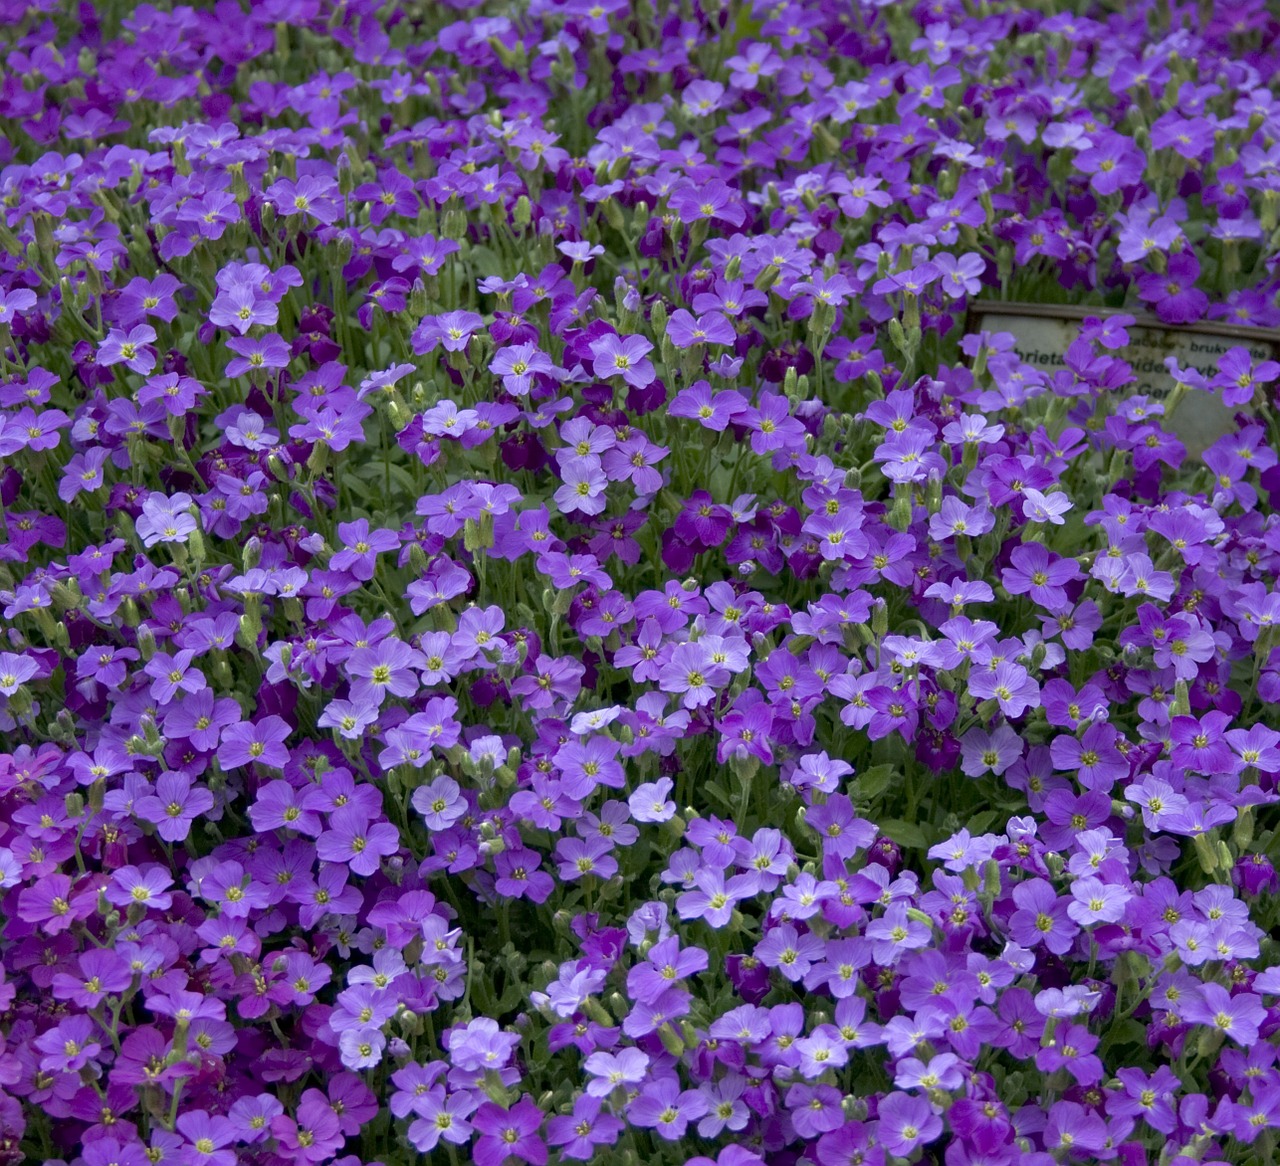 Download free photo of Aubrietia,violet,color,blossom,botanical - from ...